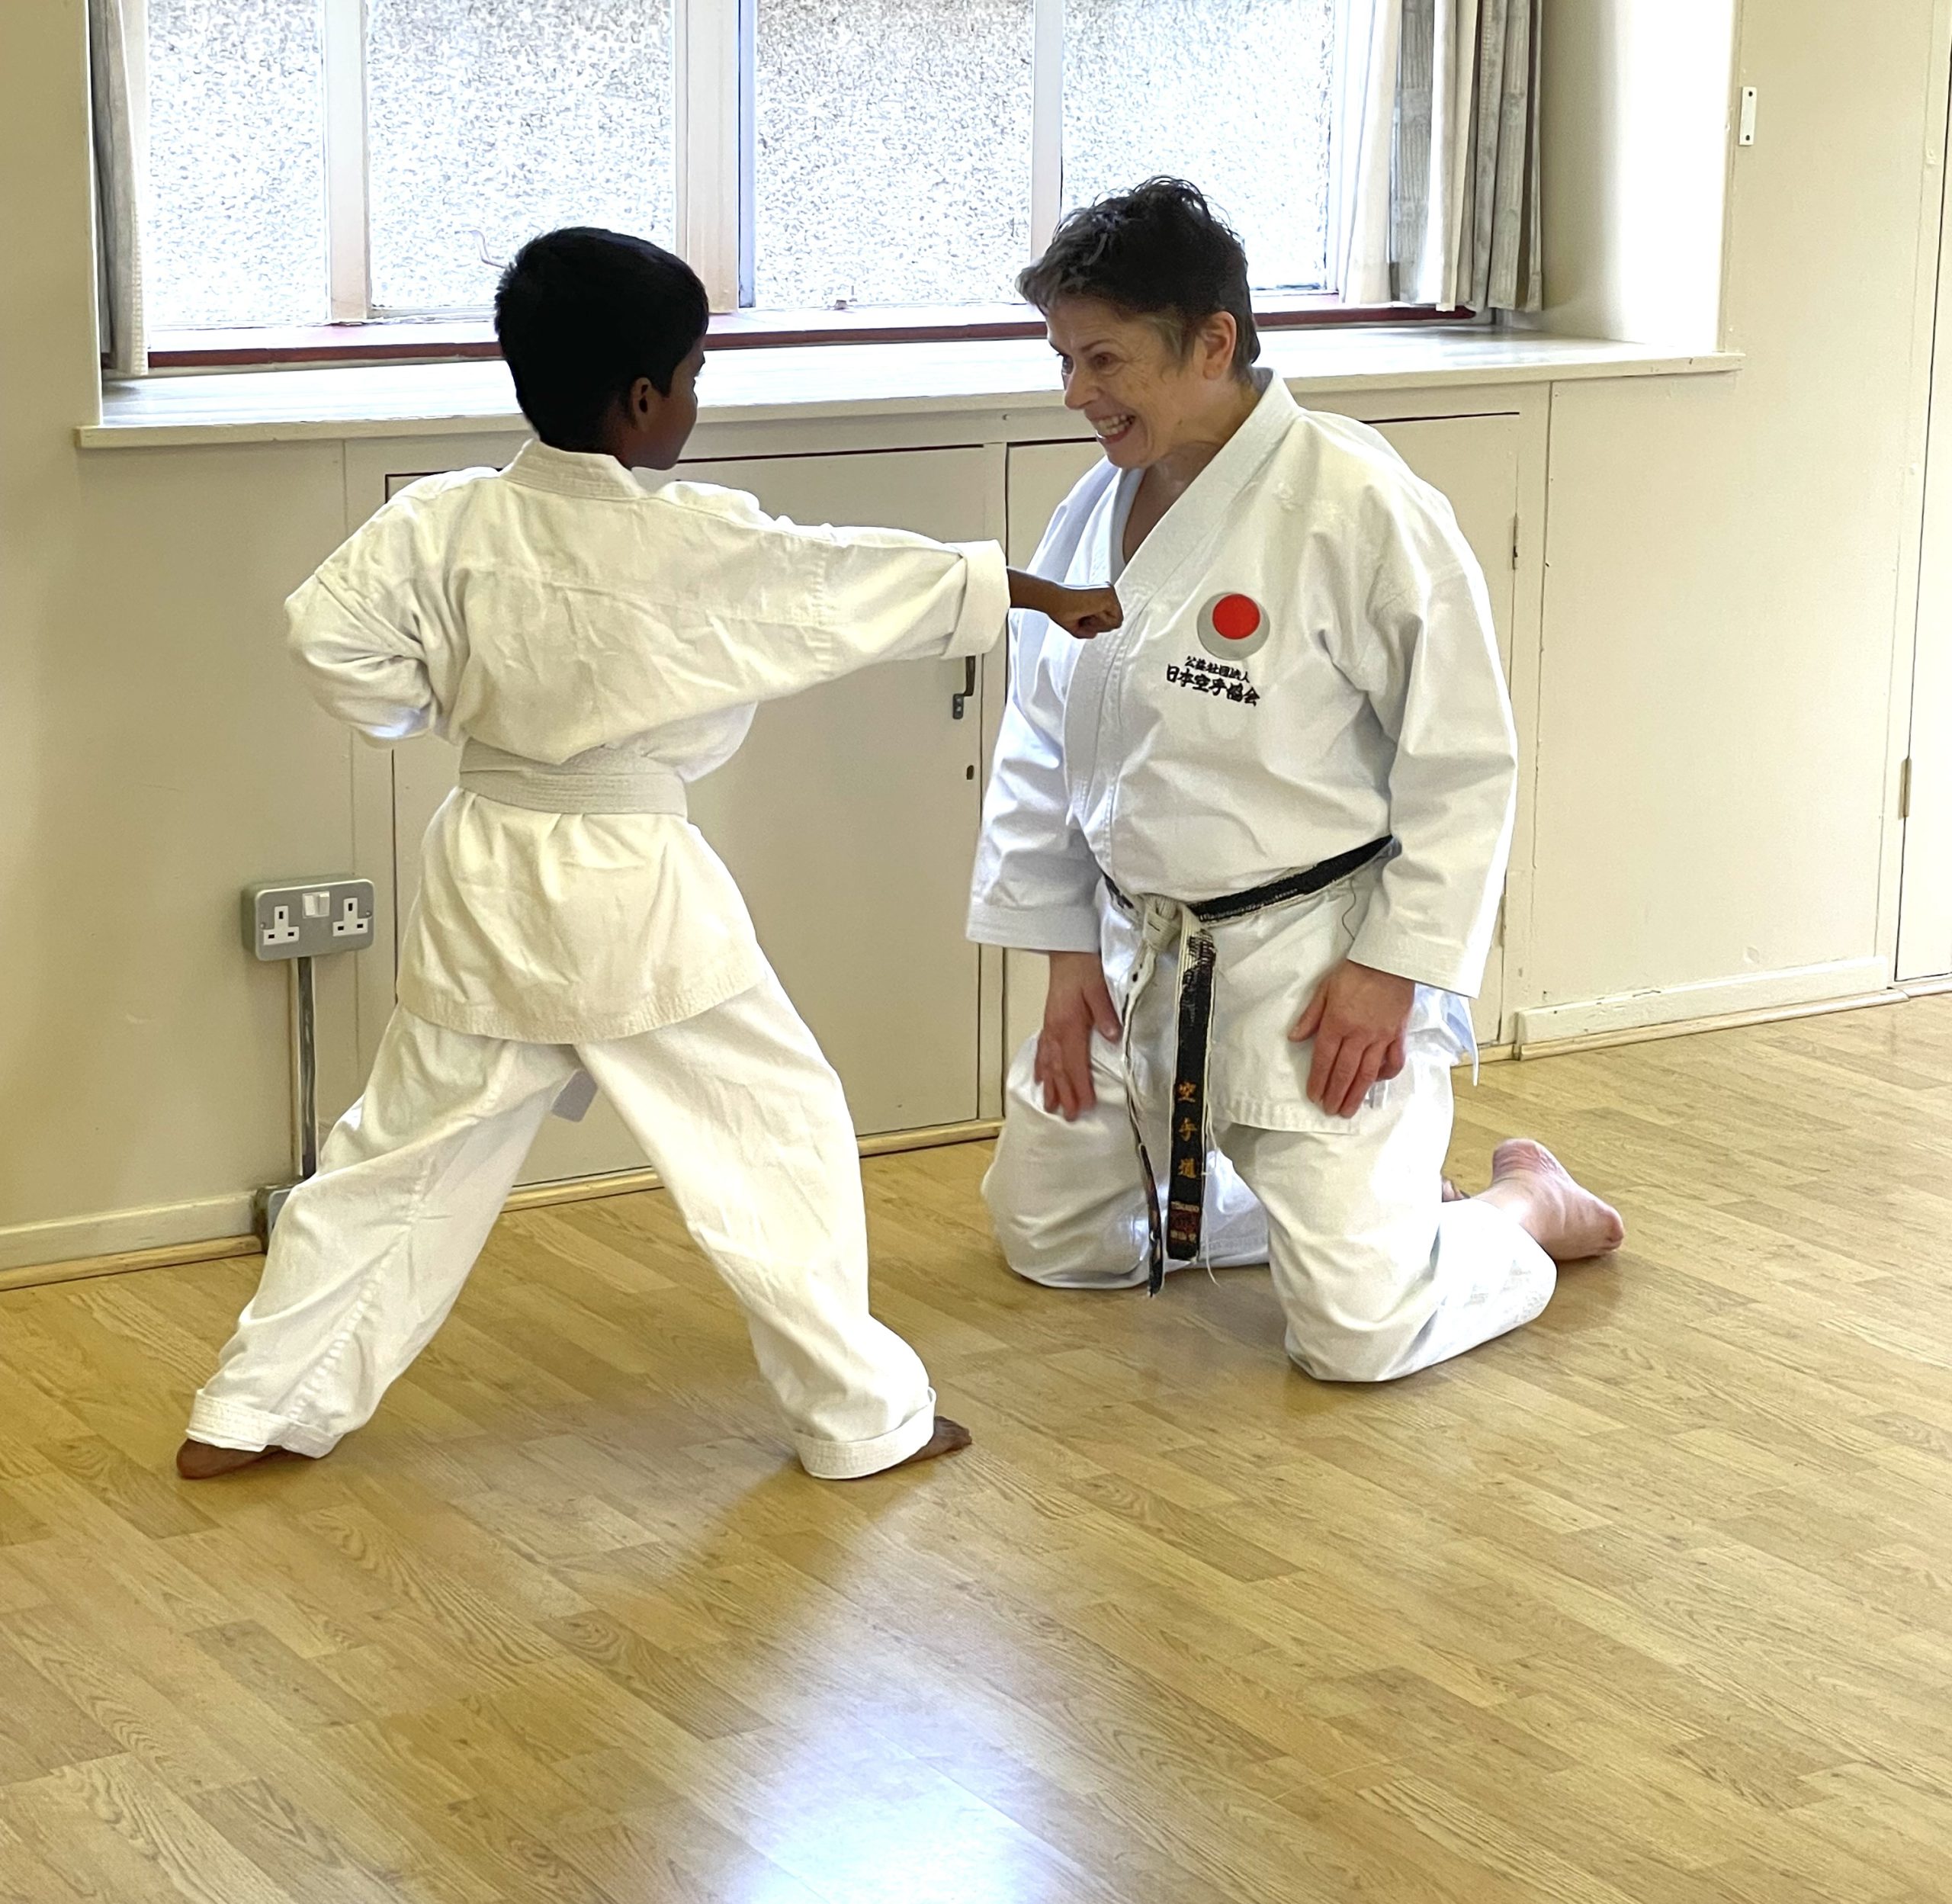 beginners karate classes in harpenden b scaled